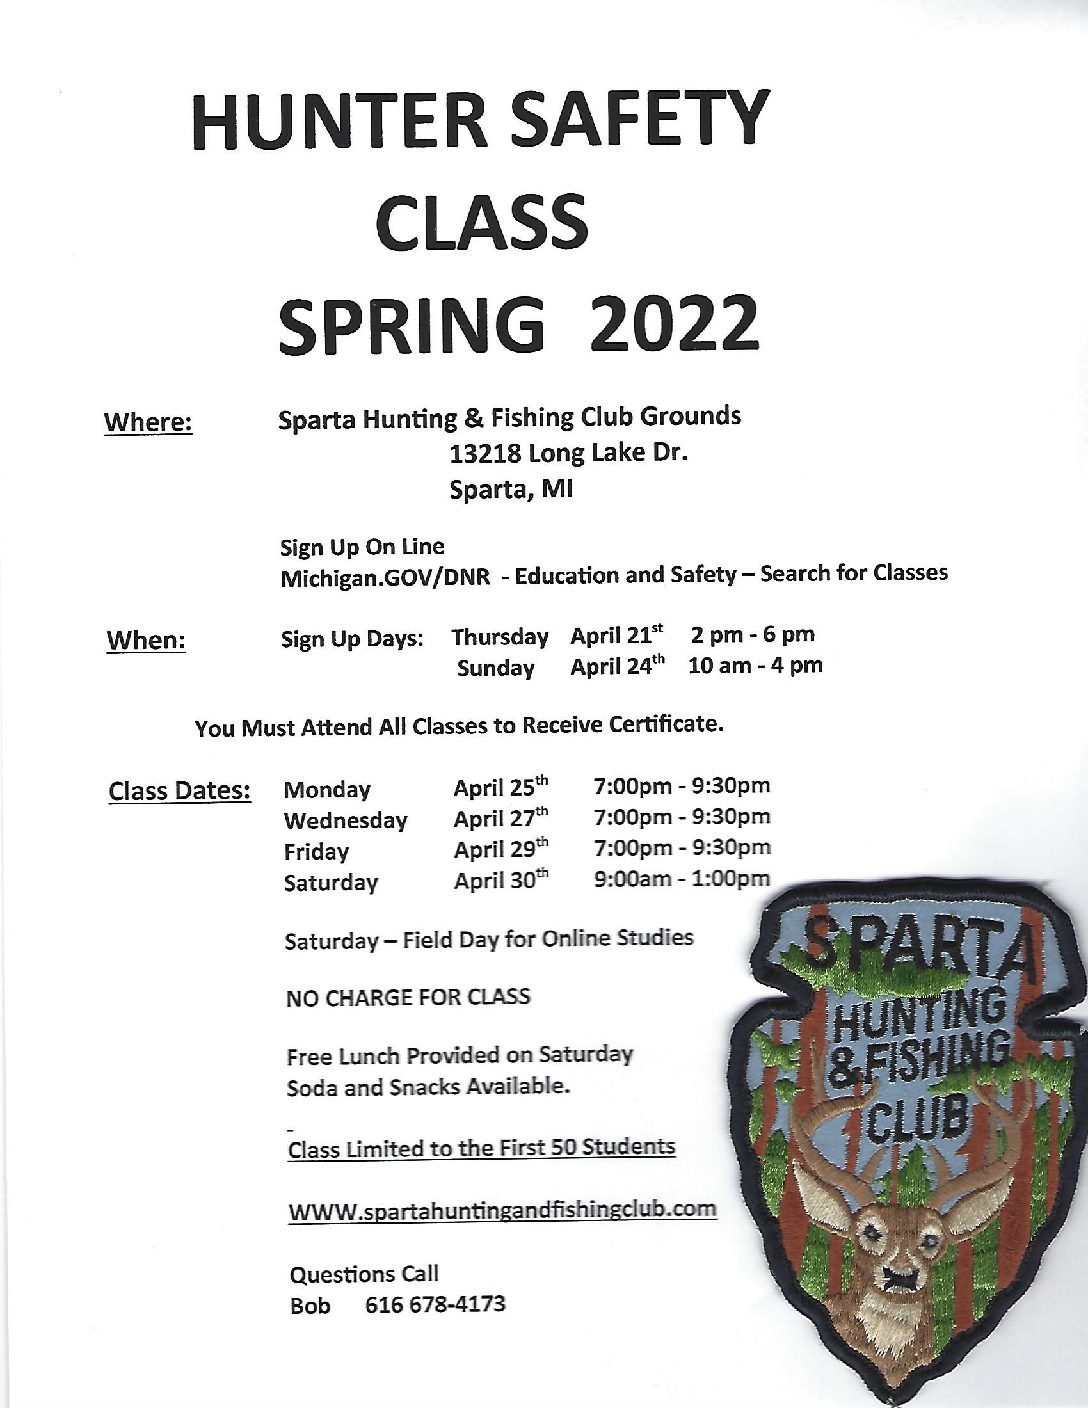 HUNTER SAFETY CLASS SPRING 2022 – Sparta Hunting And Fishing Club